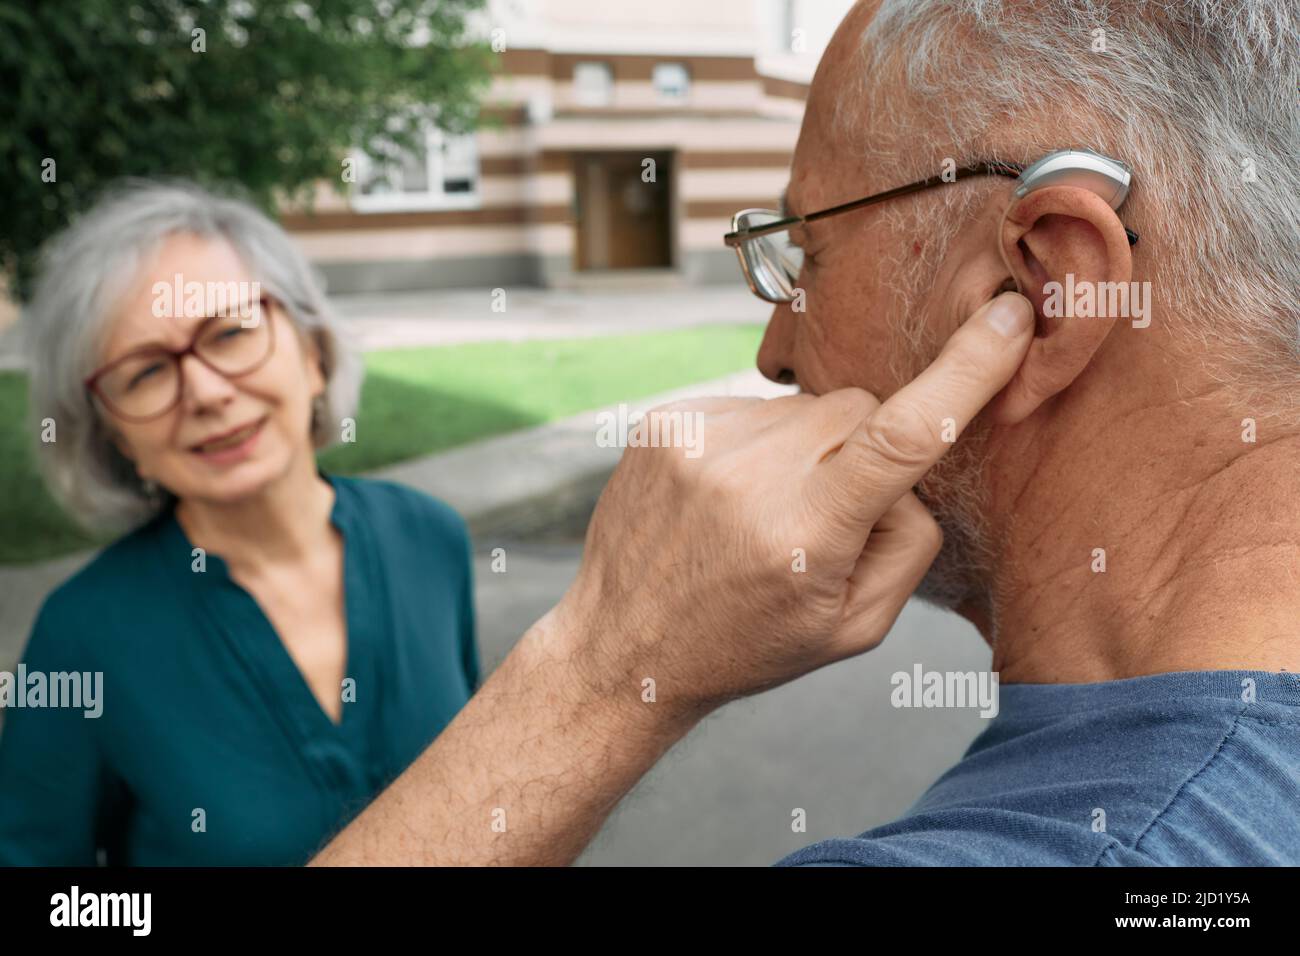 Mature man with a hearing impairment uses a hearing aid to communicate with his female senior friend outdoor. Hearing solutions Stock Photo